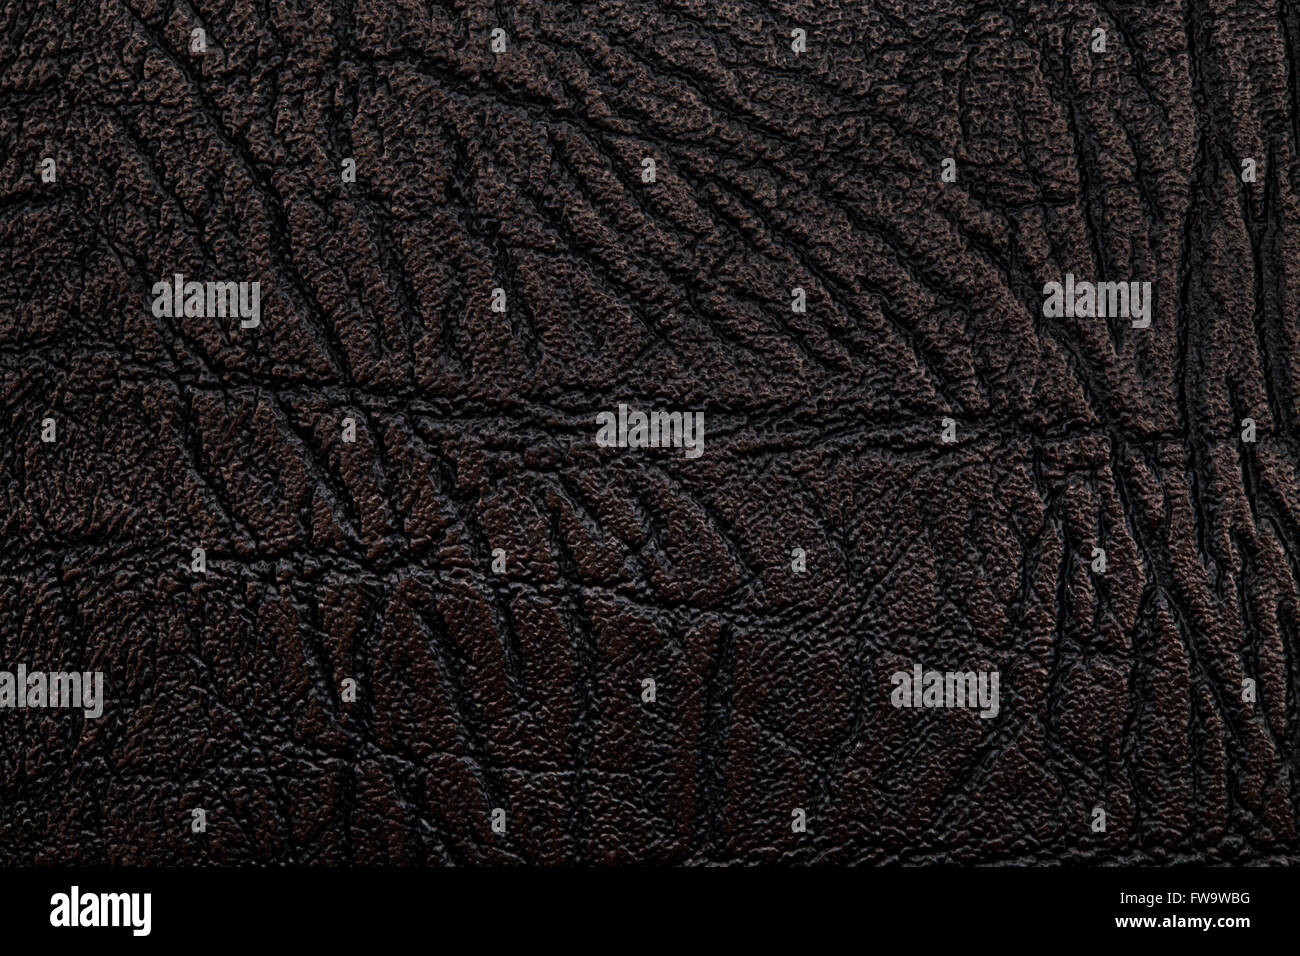 brown leather texture background, close-up photo Stock Photo